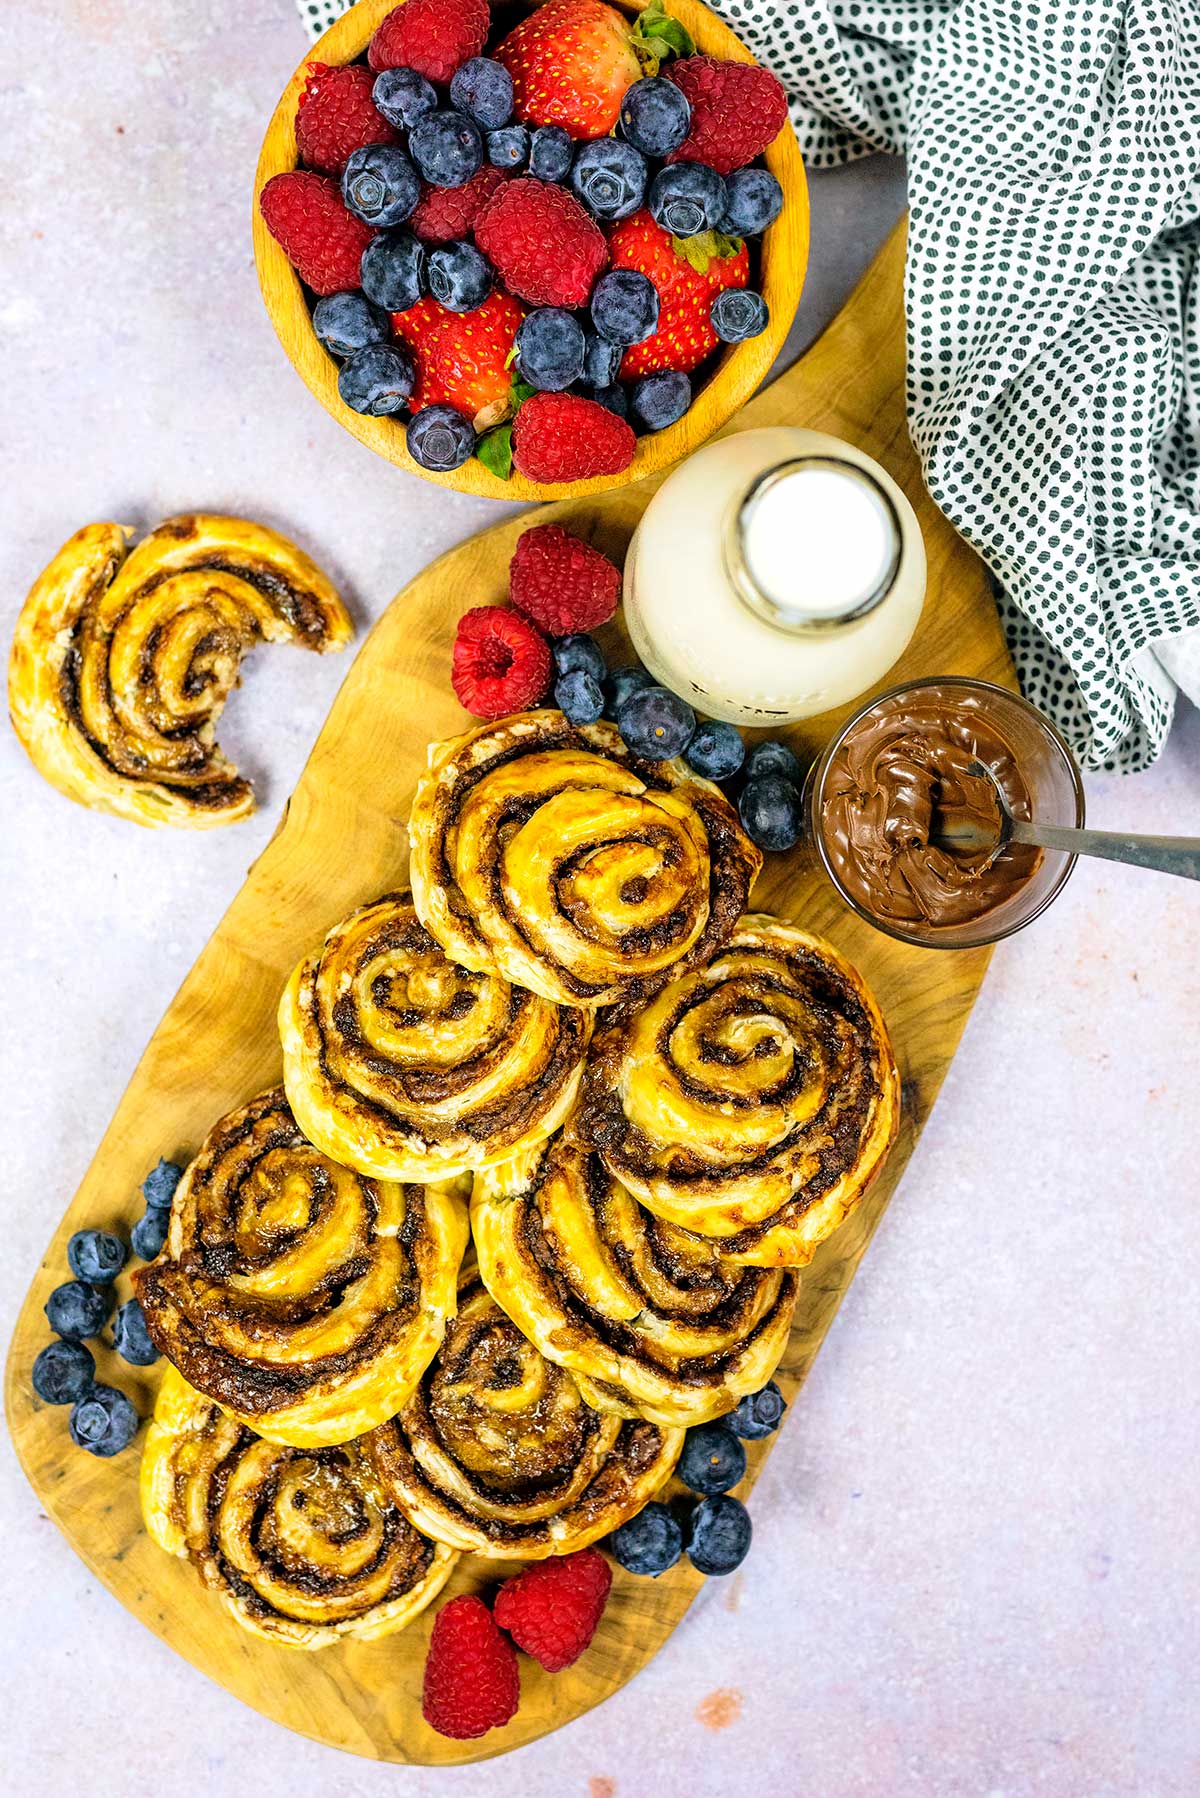 A wooden board covered in pinwheels with a bottle of milk and a bowl of berries.